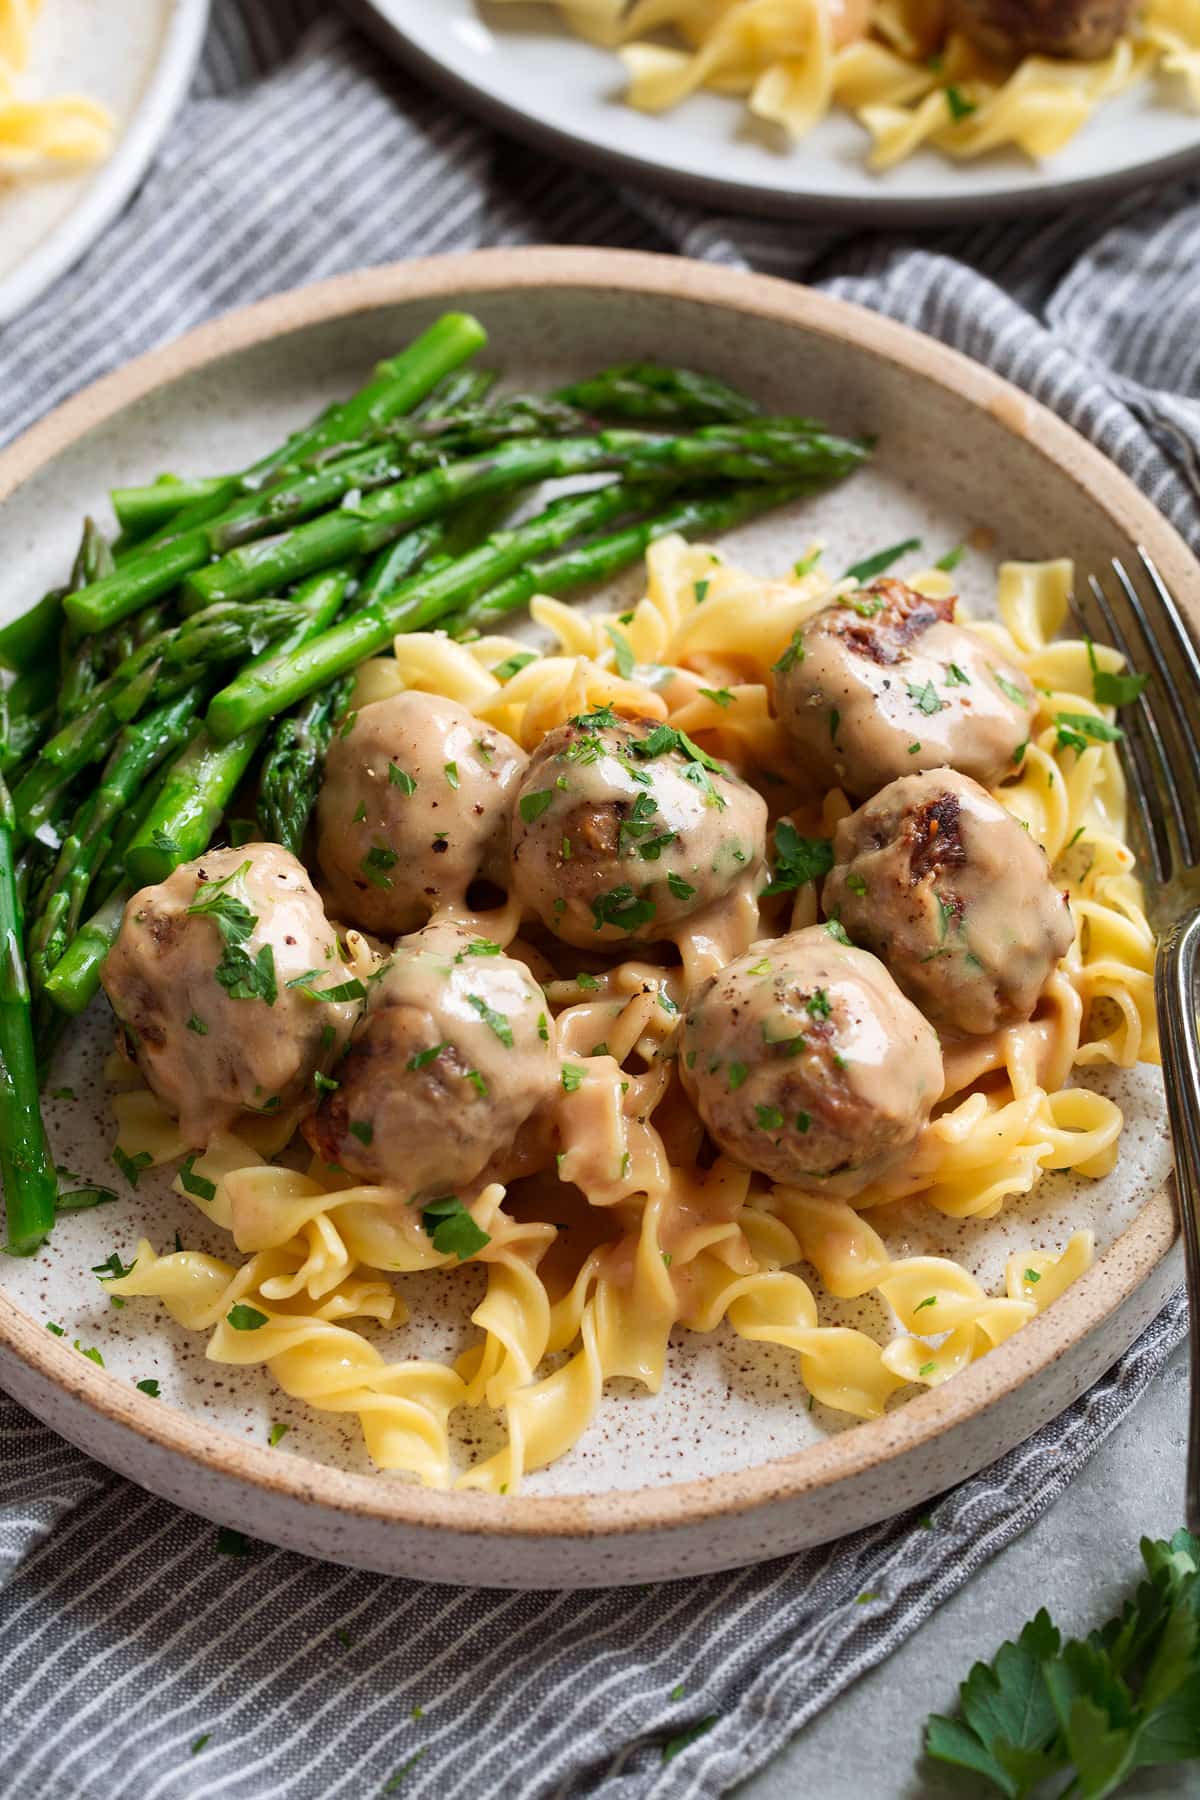 Serving of Swedish meatballs in egg noodles with a side of asparagus on a plate of speckled cream.